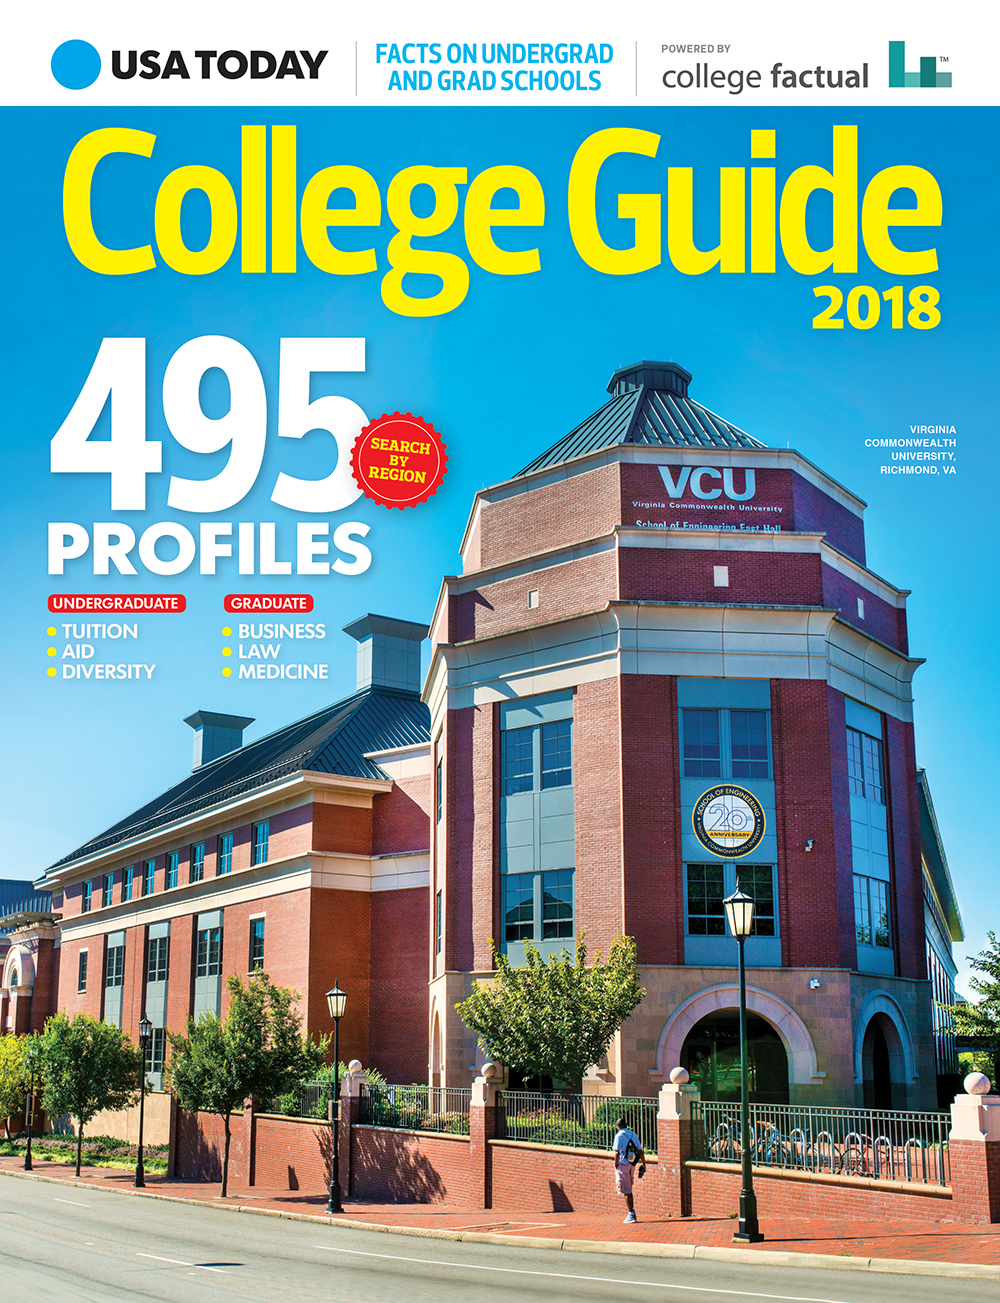 College Guide 2018 Cover.jpg